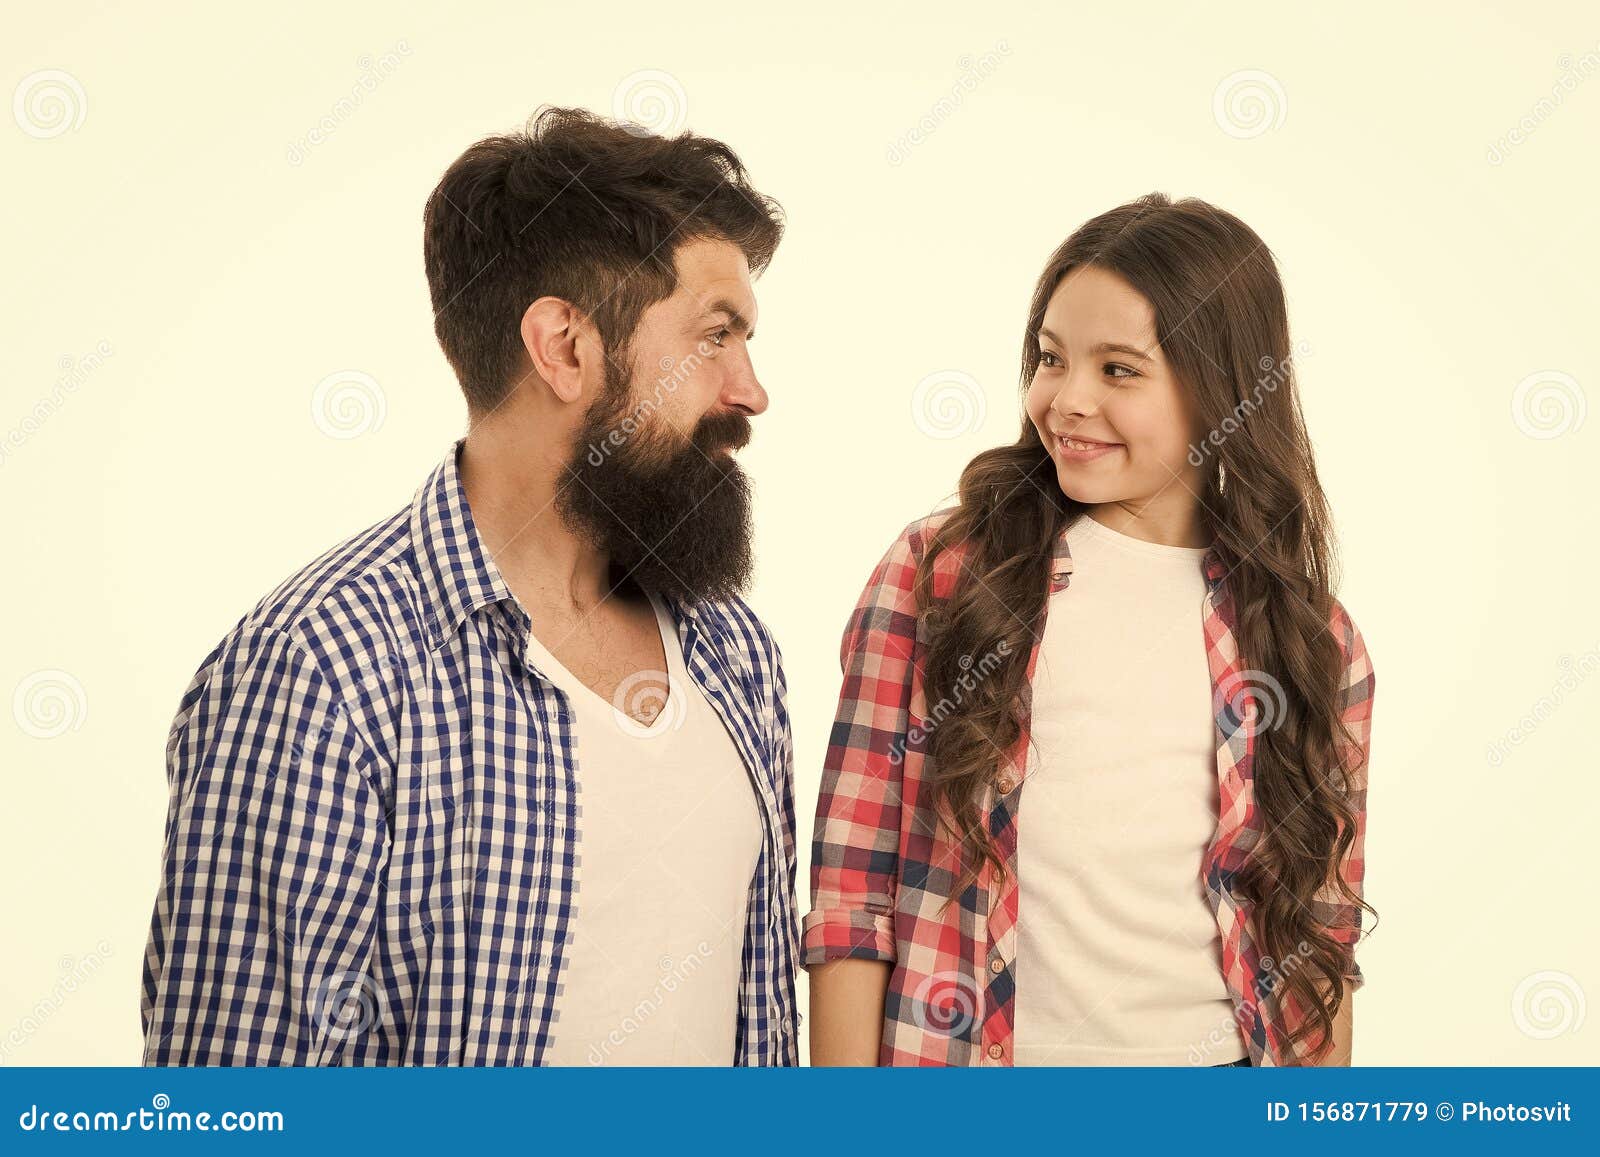 Little Girl Child Love Her Father. Happy Family, Happy Child. Bearded Man  Father with Child. Fathers Cutie. Family Day Stock Image - Image of cute,  hairstyle: 156871779